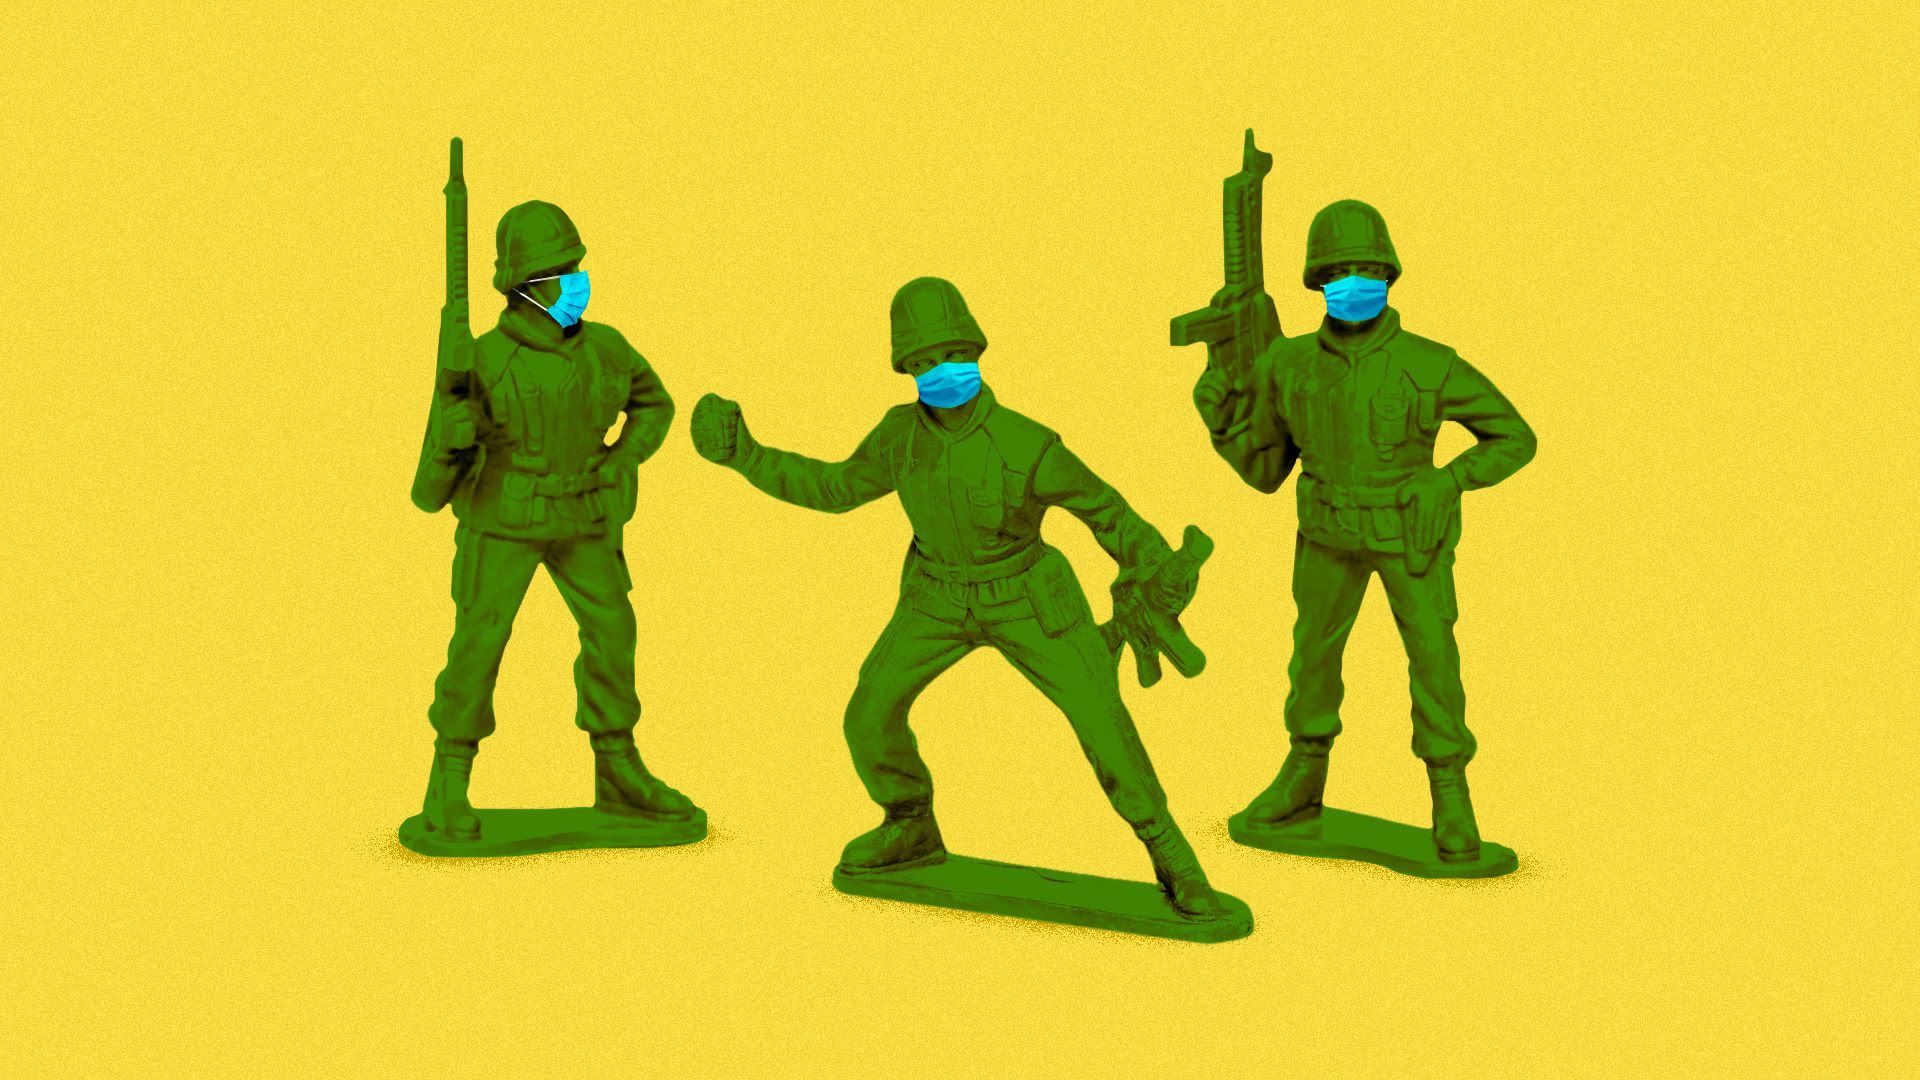 An illustration of toy army men wearing surgical masks